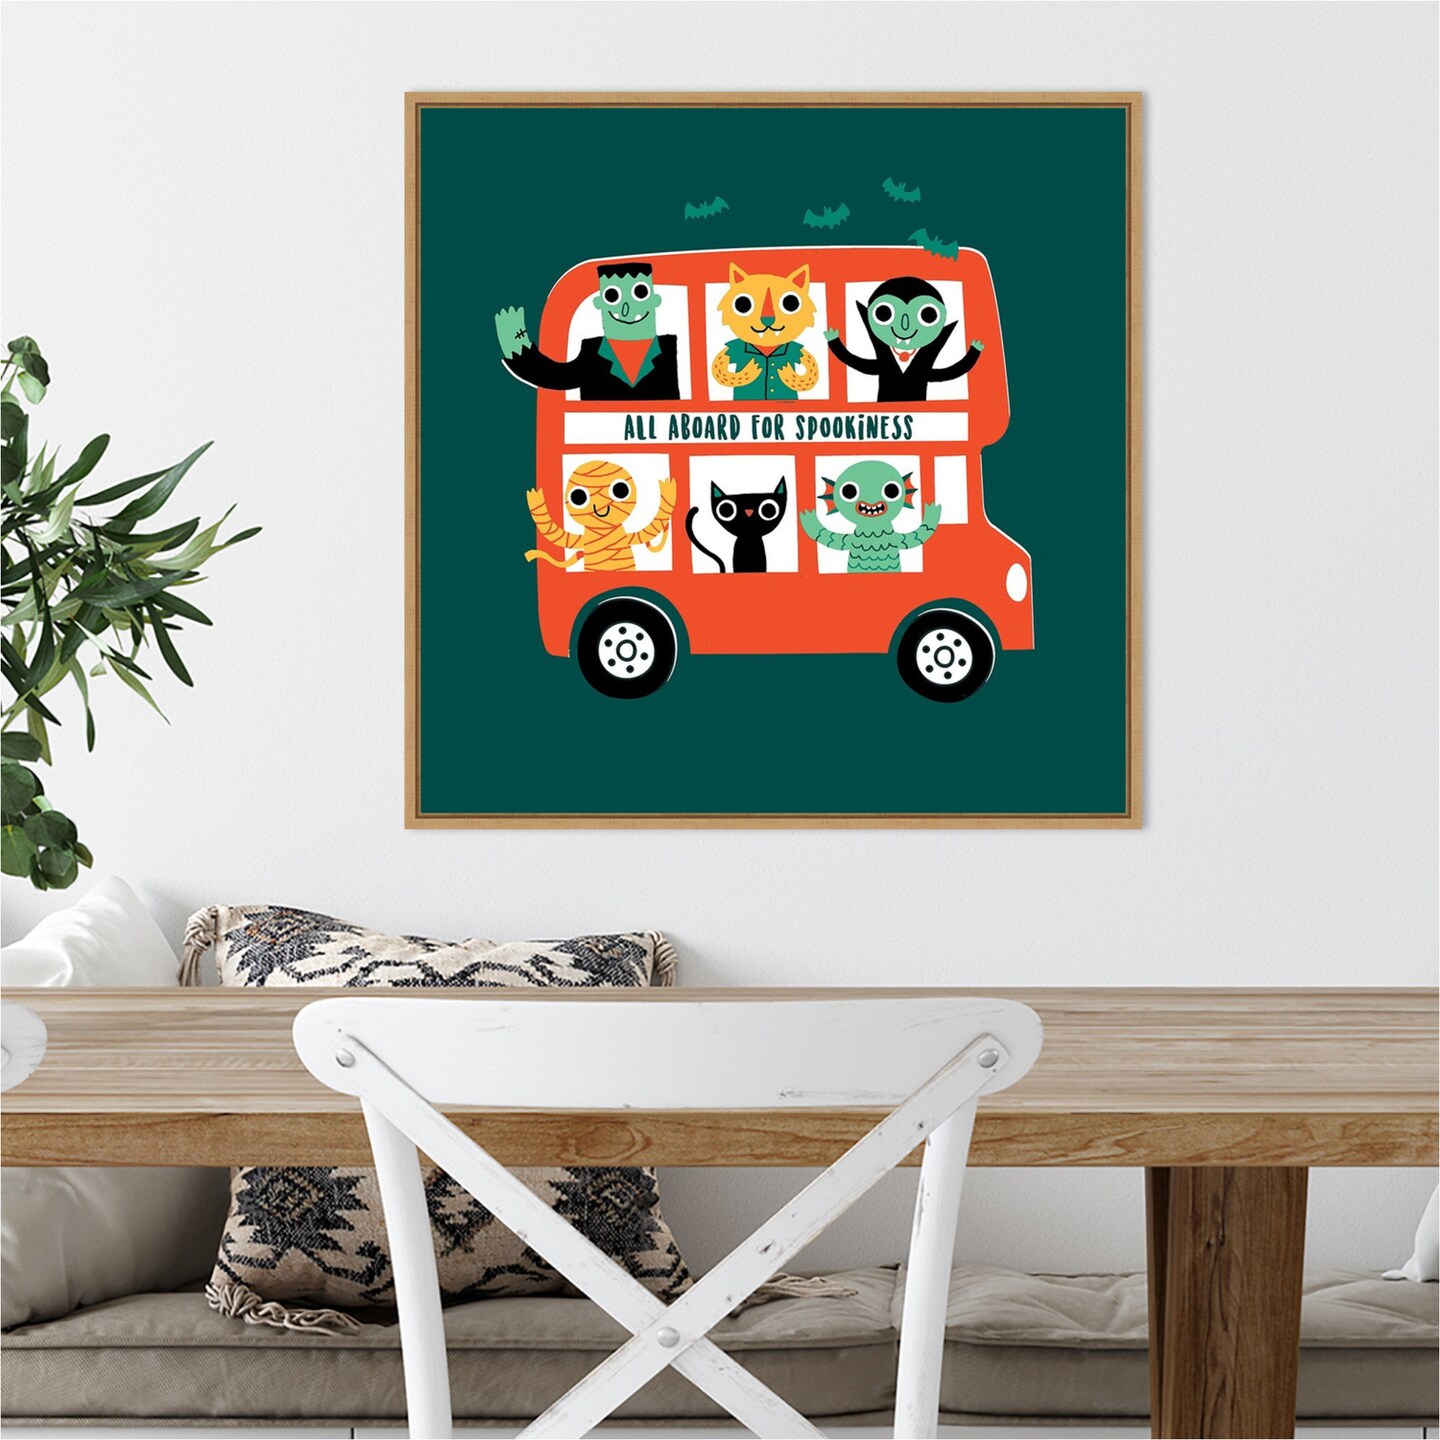 Spooky Bus by Michael Buxton 22-in. W x 22-in. H. Canvas Wall Art Print Framed in Natural